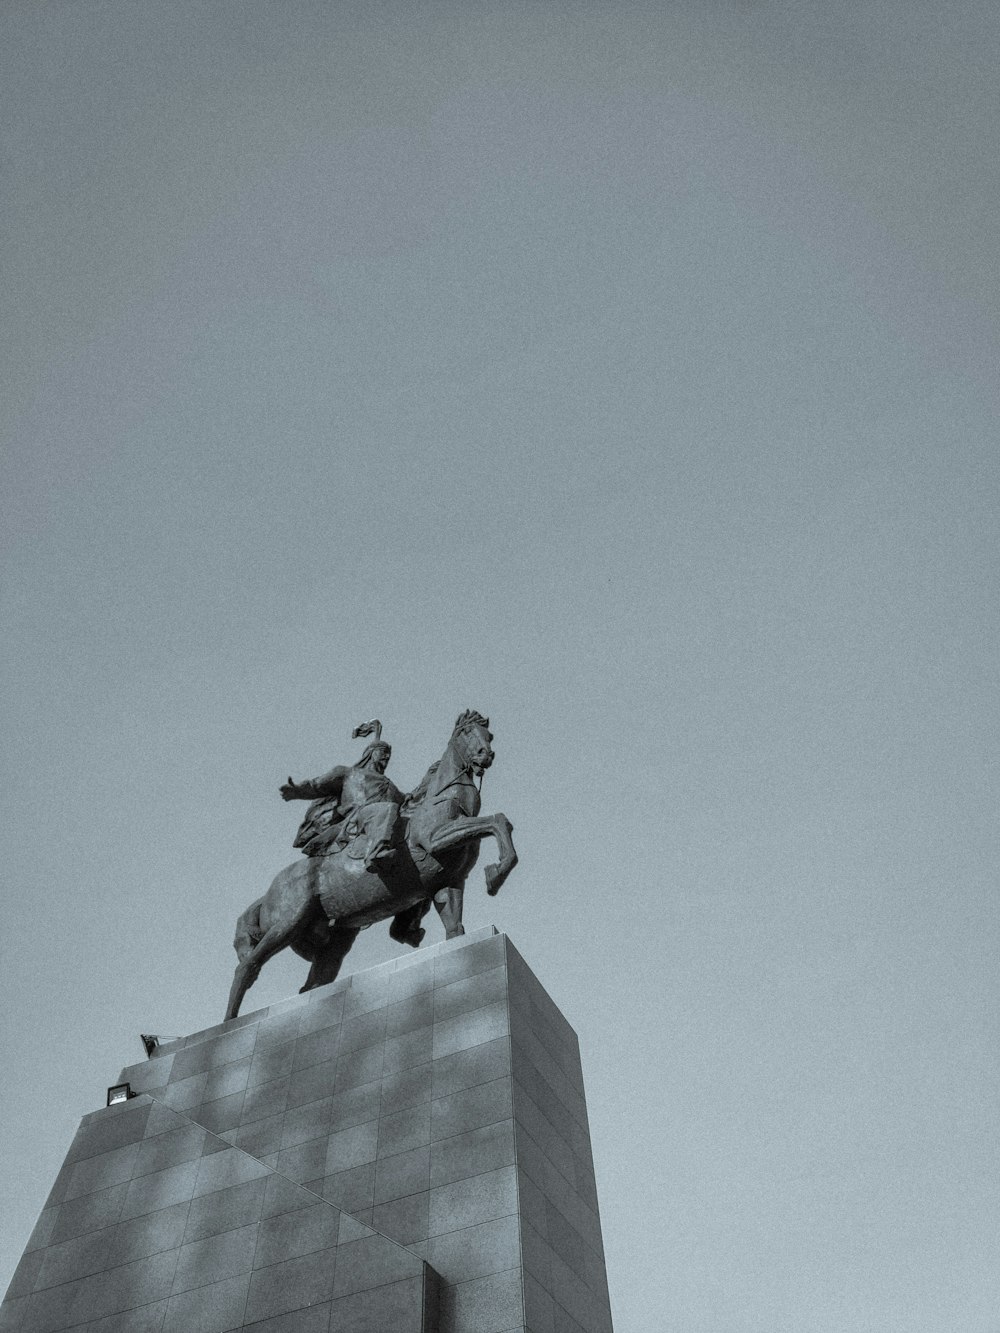 a black and white photo of a statue of a man riding a horse